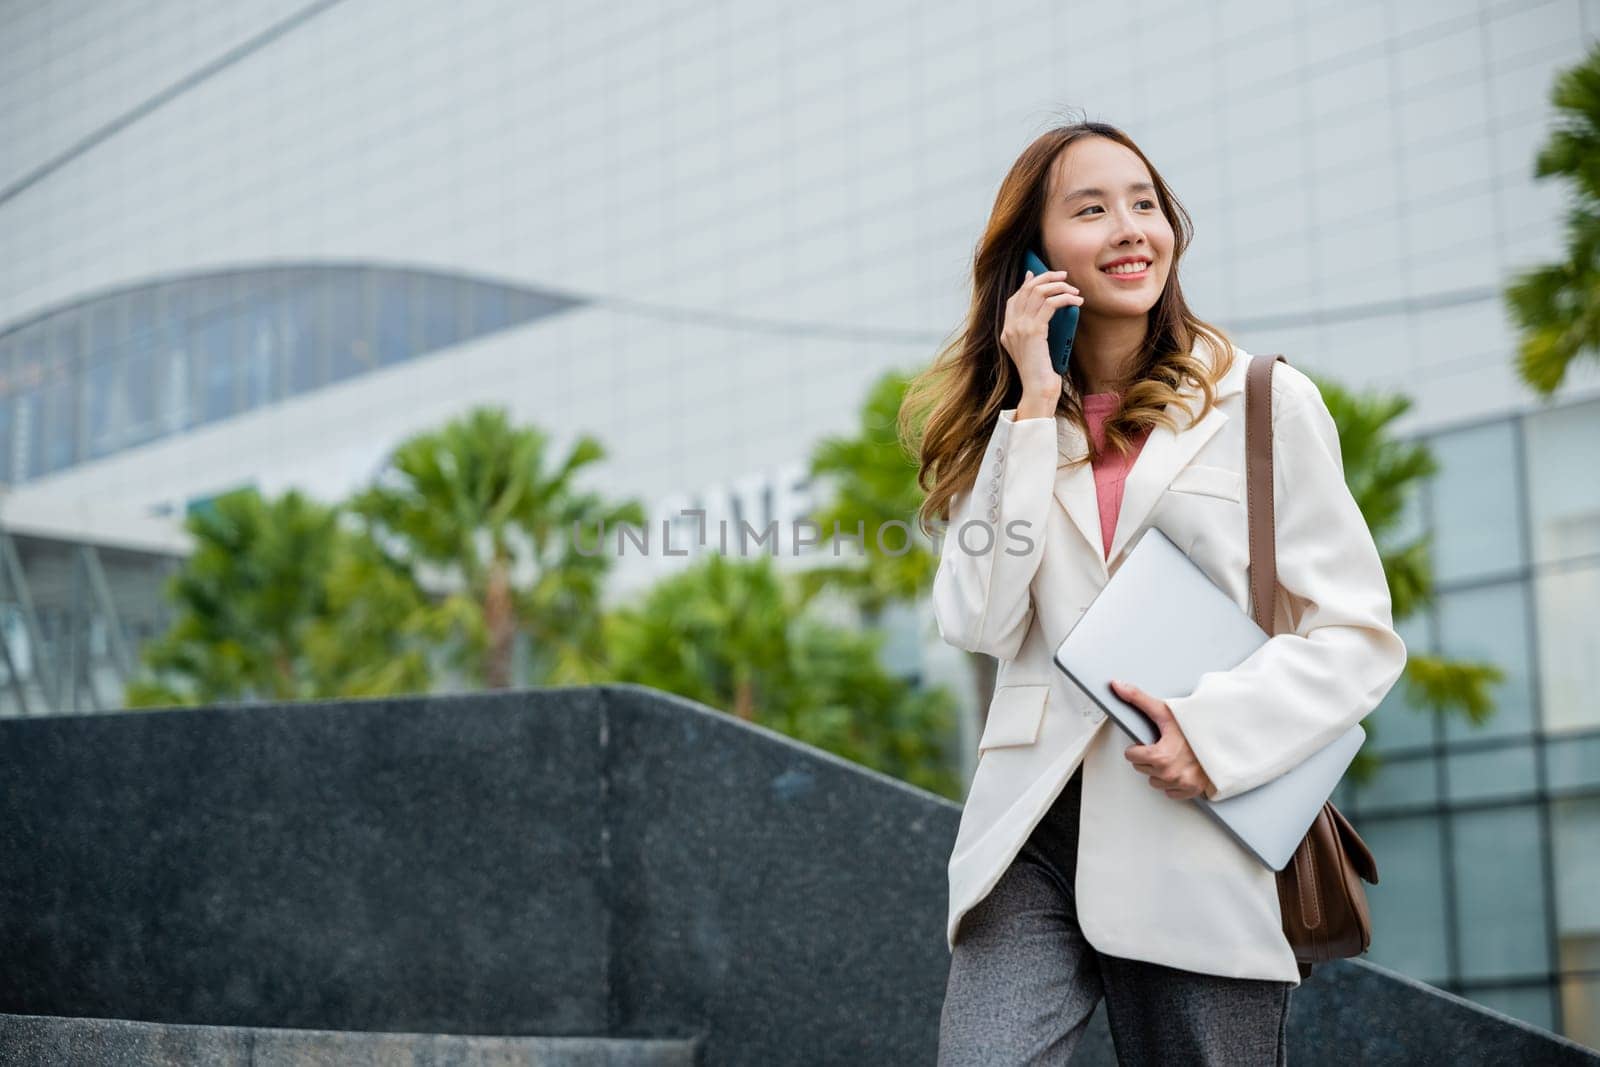 Happy successful Asian businesswoman holding laptop and Talk with cellphone on the Street next to a glass building. successfully work go to against city scene in background of modern office buildings.